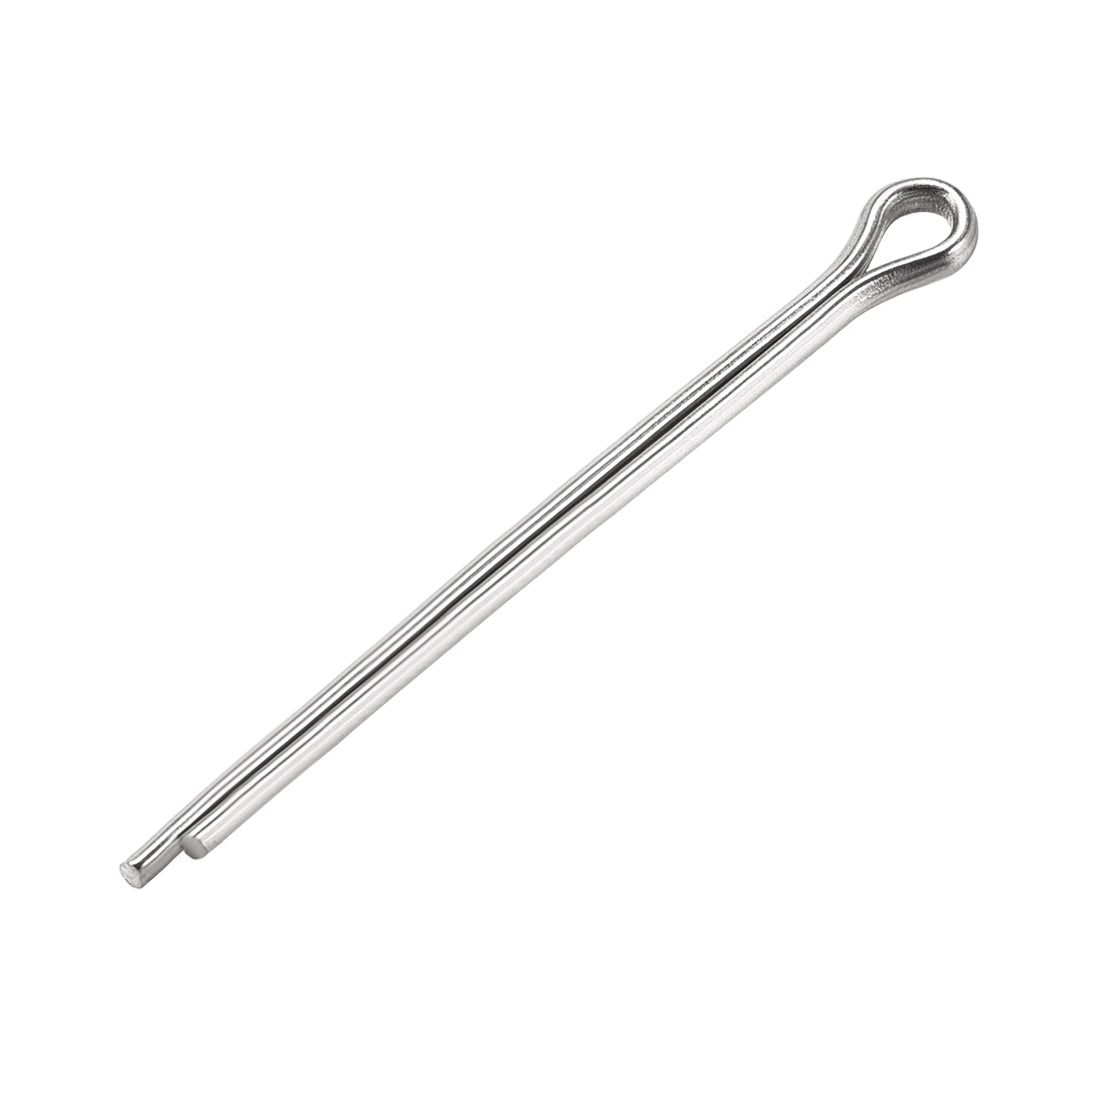 uxcell Uxcell Split Cotter Pin -  304 Stainless Steel 2-Prongs Silver Tone 30Pcs